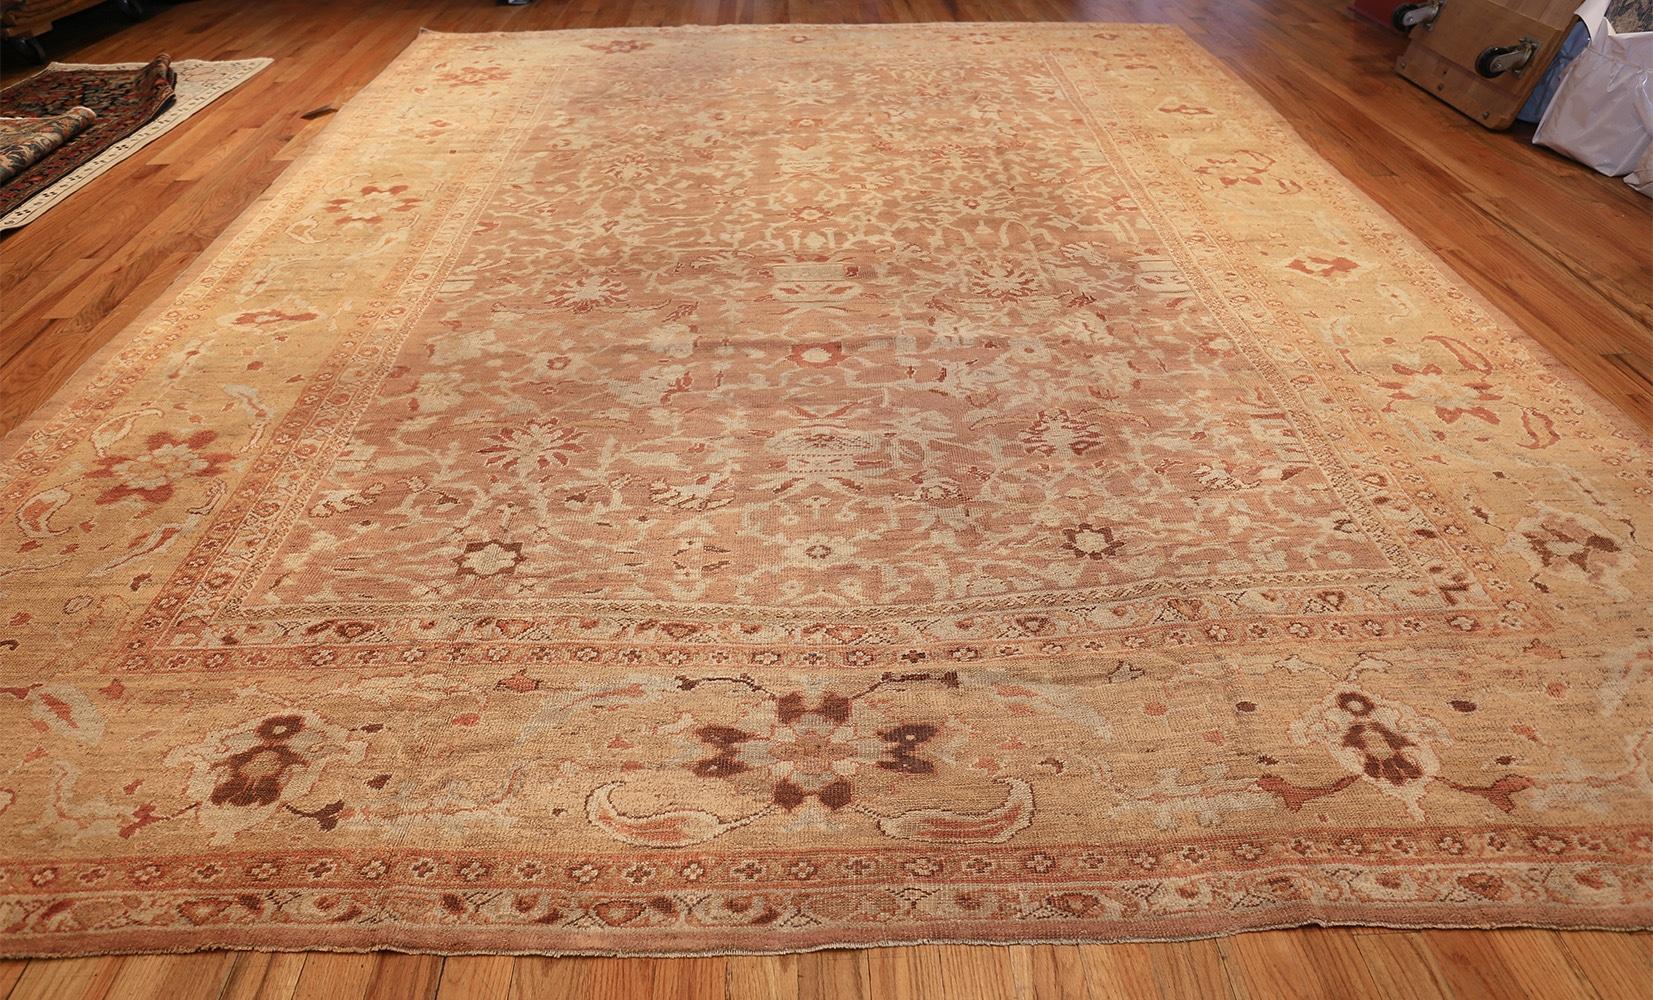 Large Decorative Antique Persian Ziegler Sultanabad Rug. Size: 11 ft x 15 ft 4